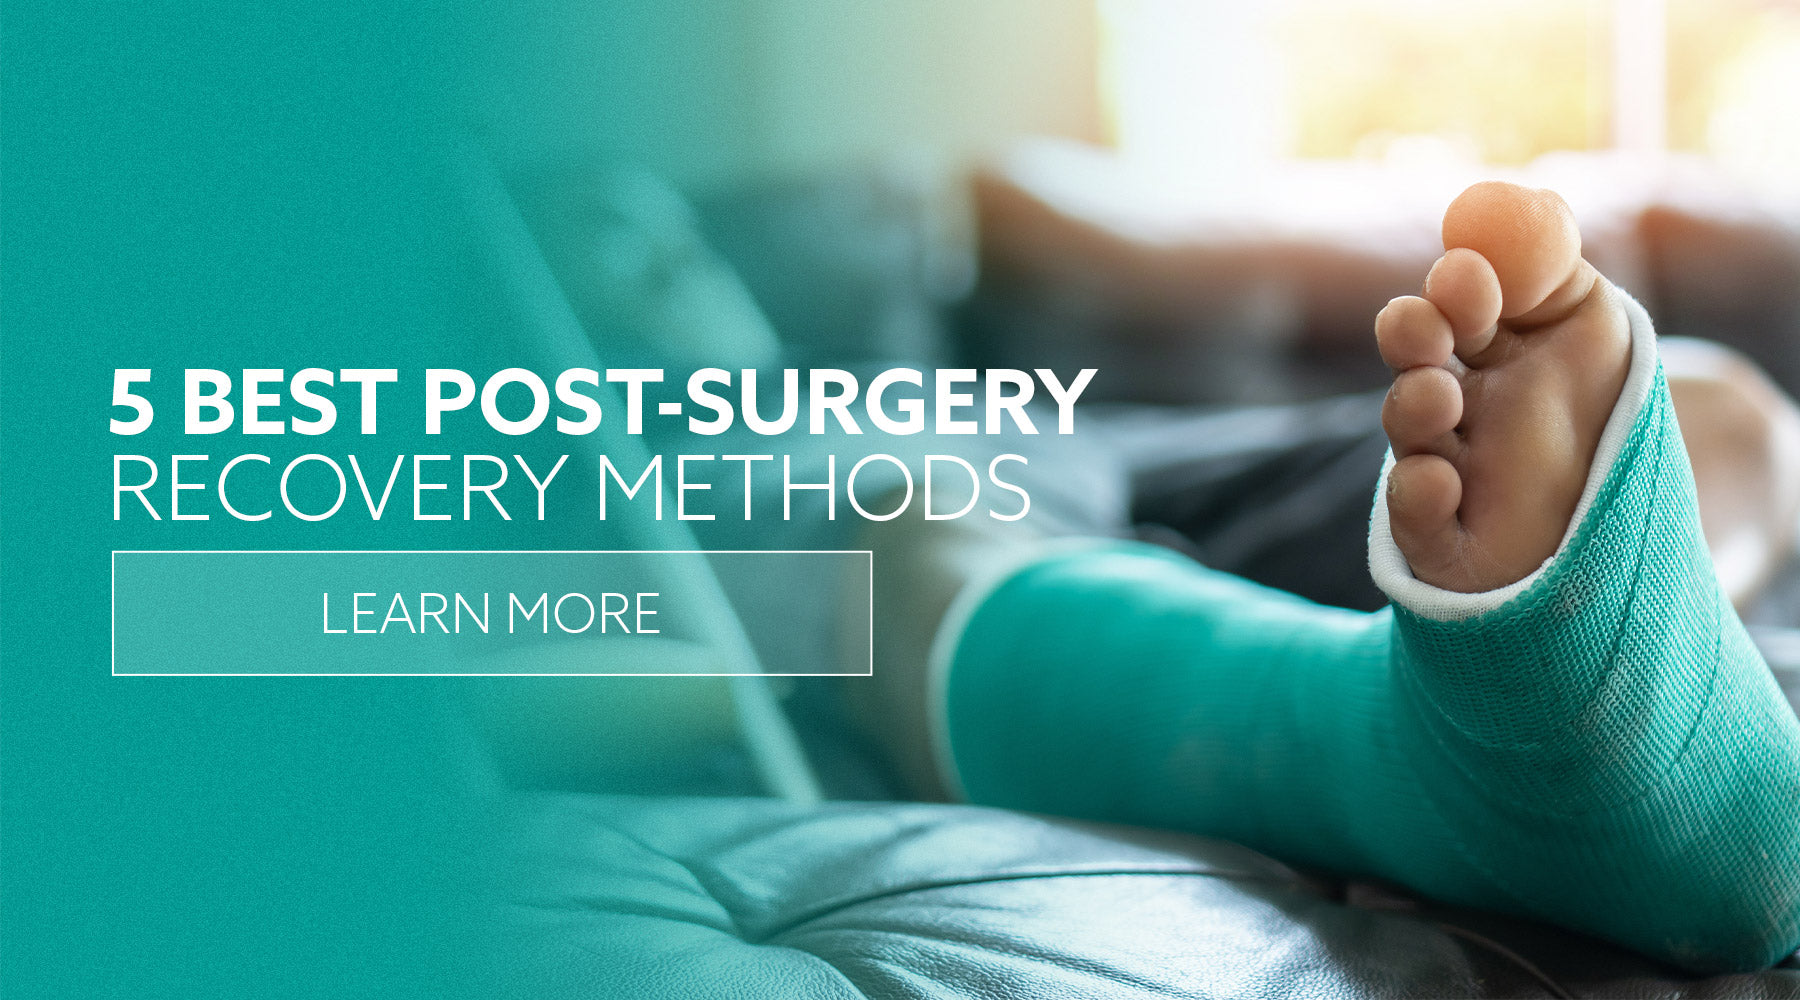 5 Best Post-Surgery Recovery Methods